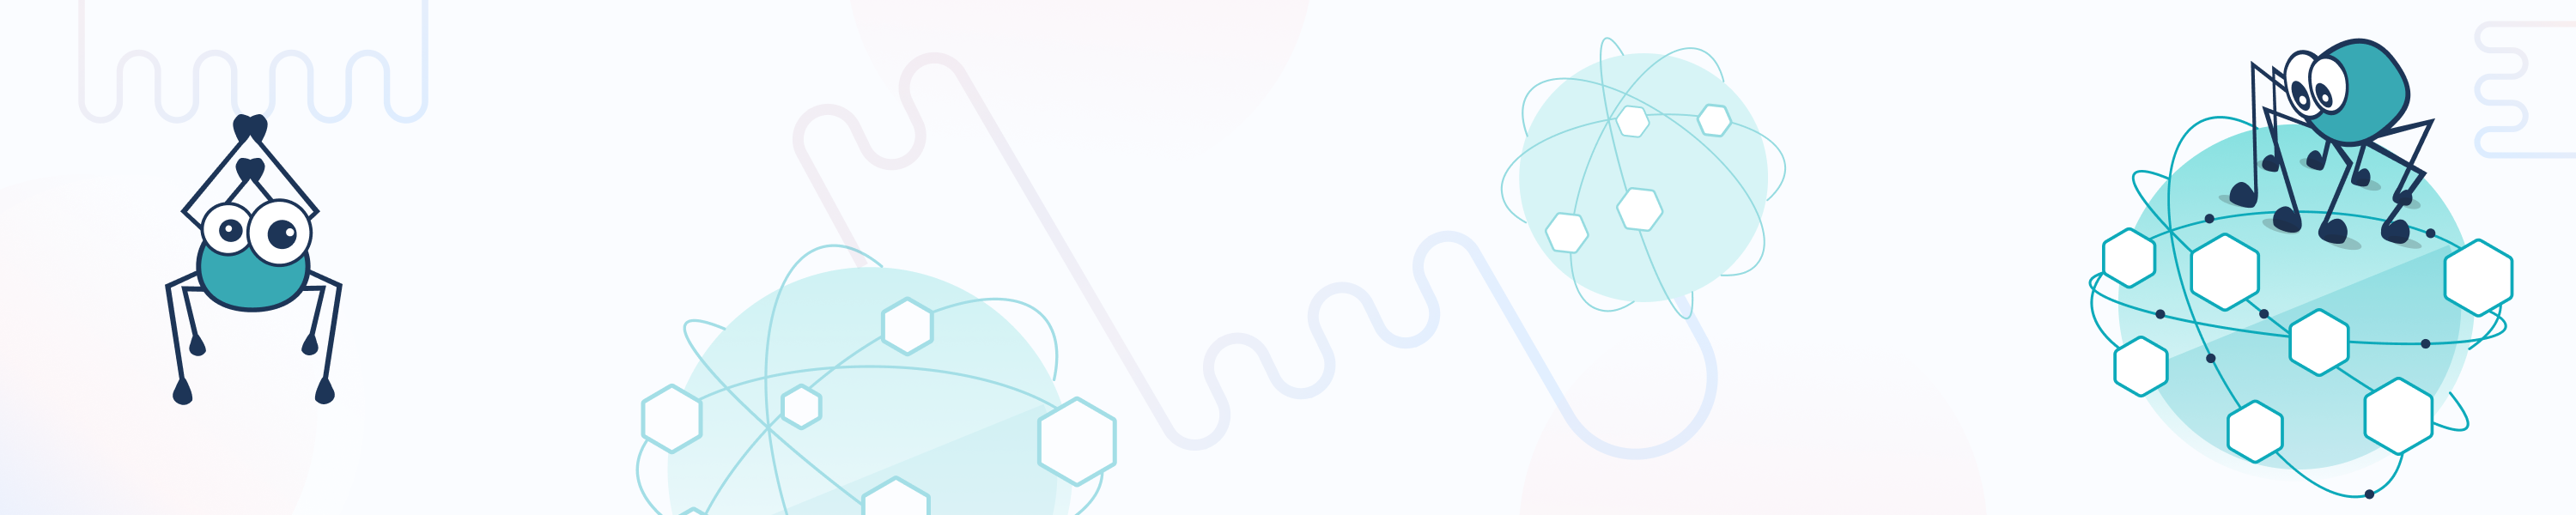 Wide banner showcasing playful tech illustrations, including a quirky spider-like character representing API Platform, over a gentle blue and white background.